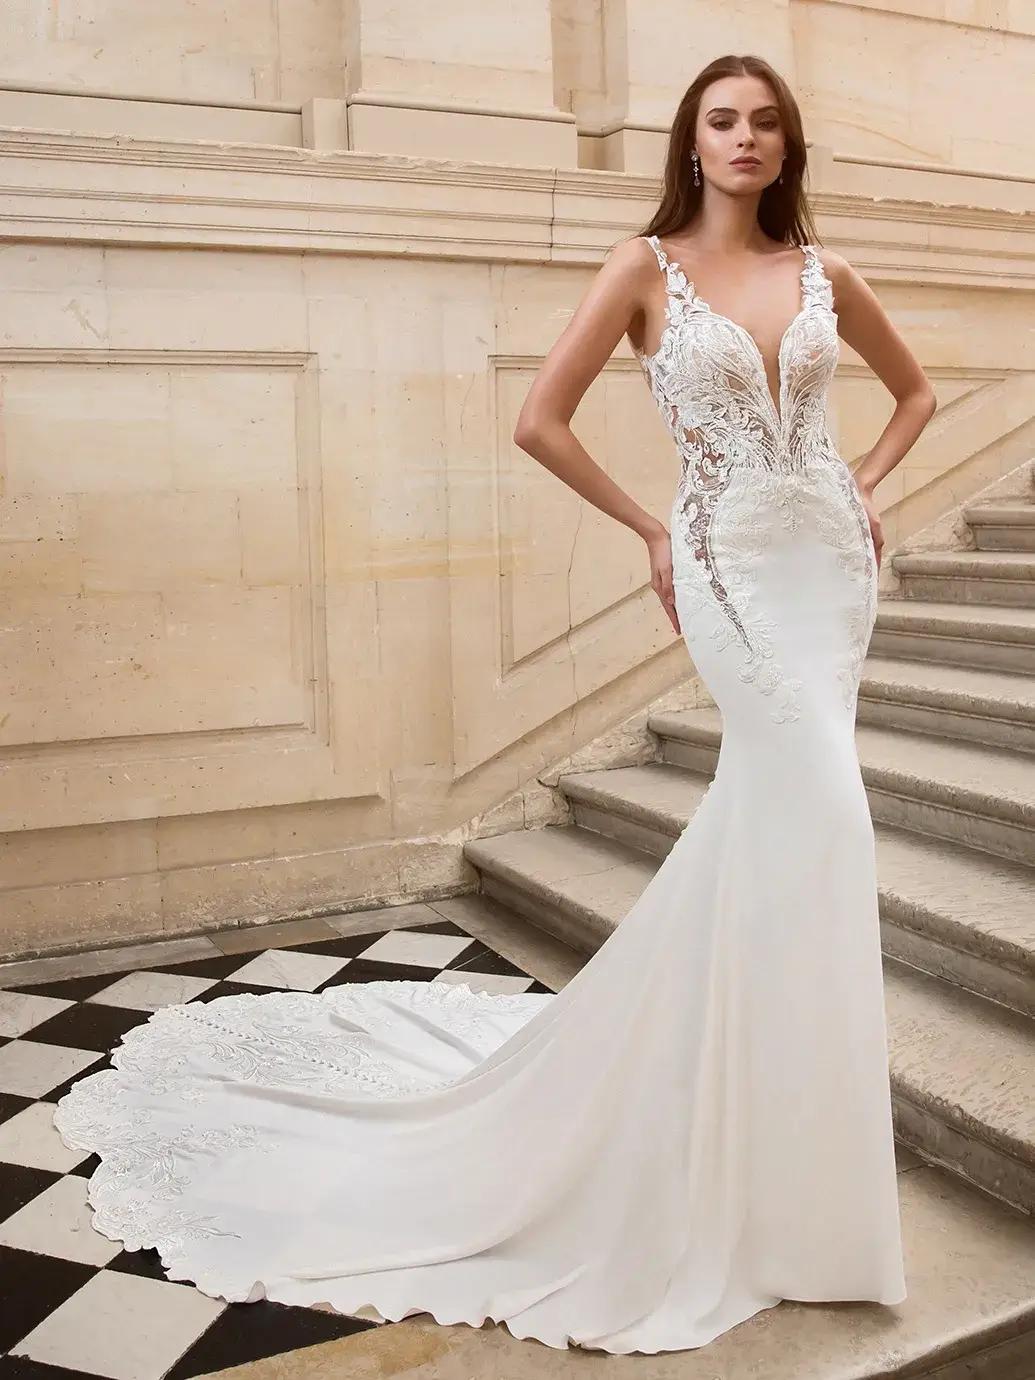 Chic and Sophisticated: Exploring the Latest Élysée Bridal Gowns Image